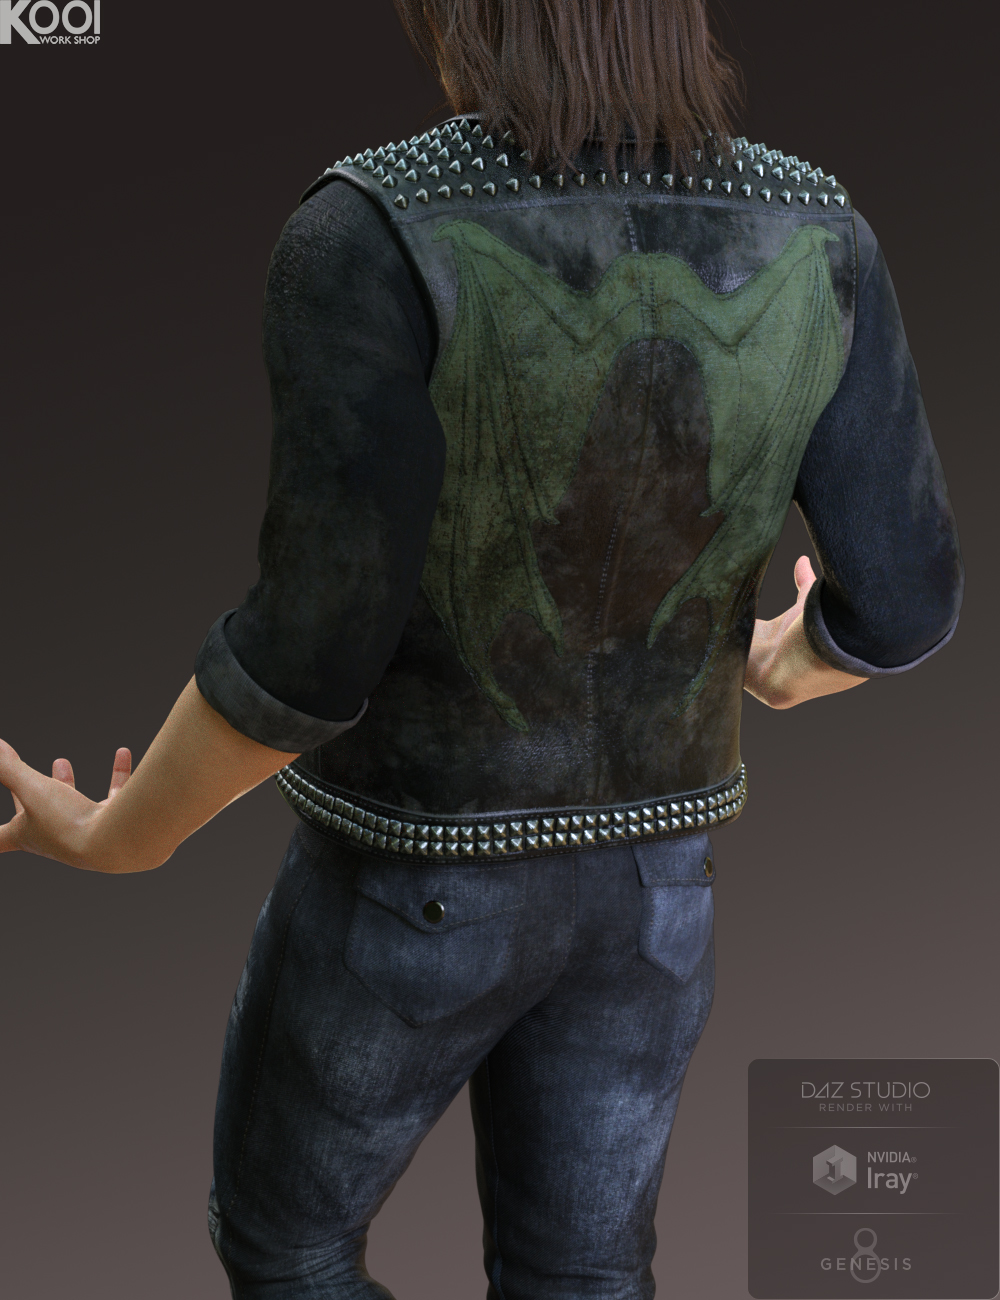 Willis Outfit for Genesis 8 and 3 Male(s) by: Kool, 3D Models by Daz 3D